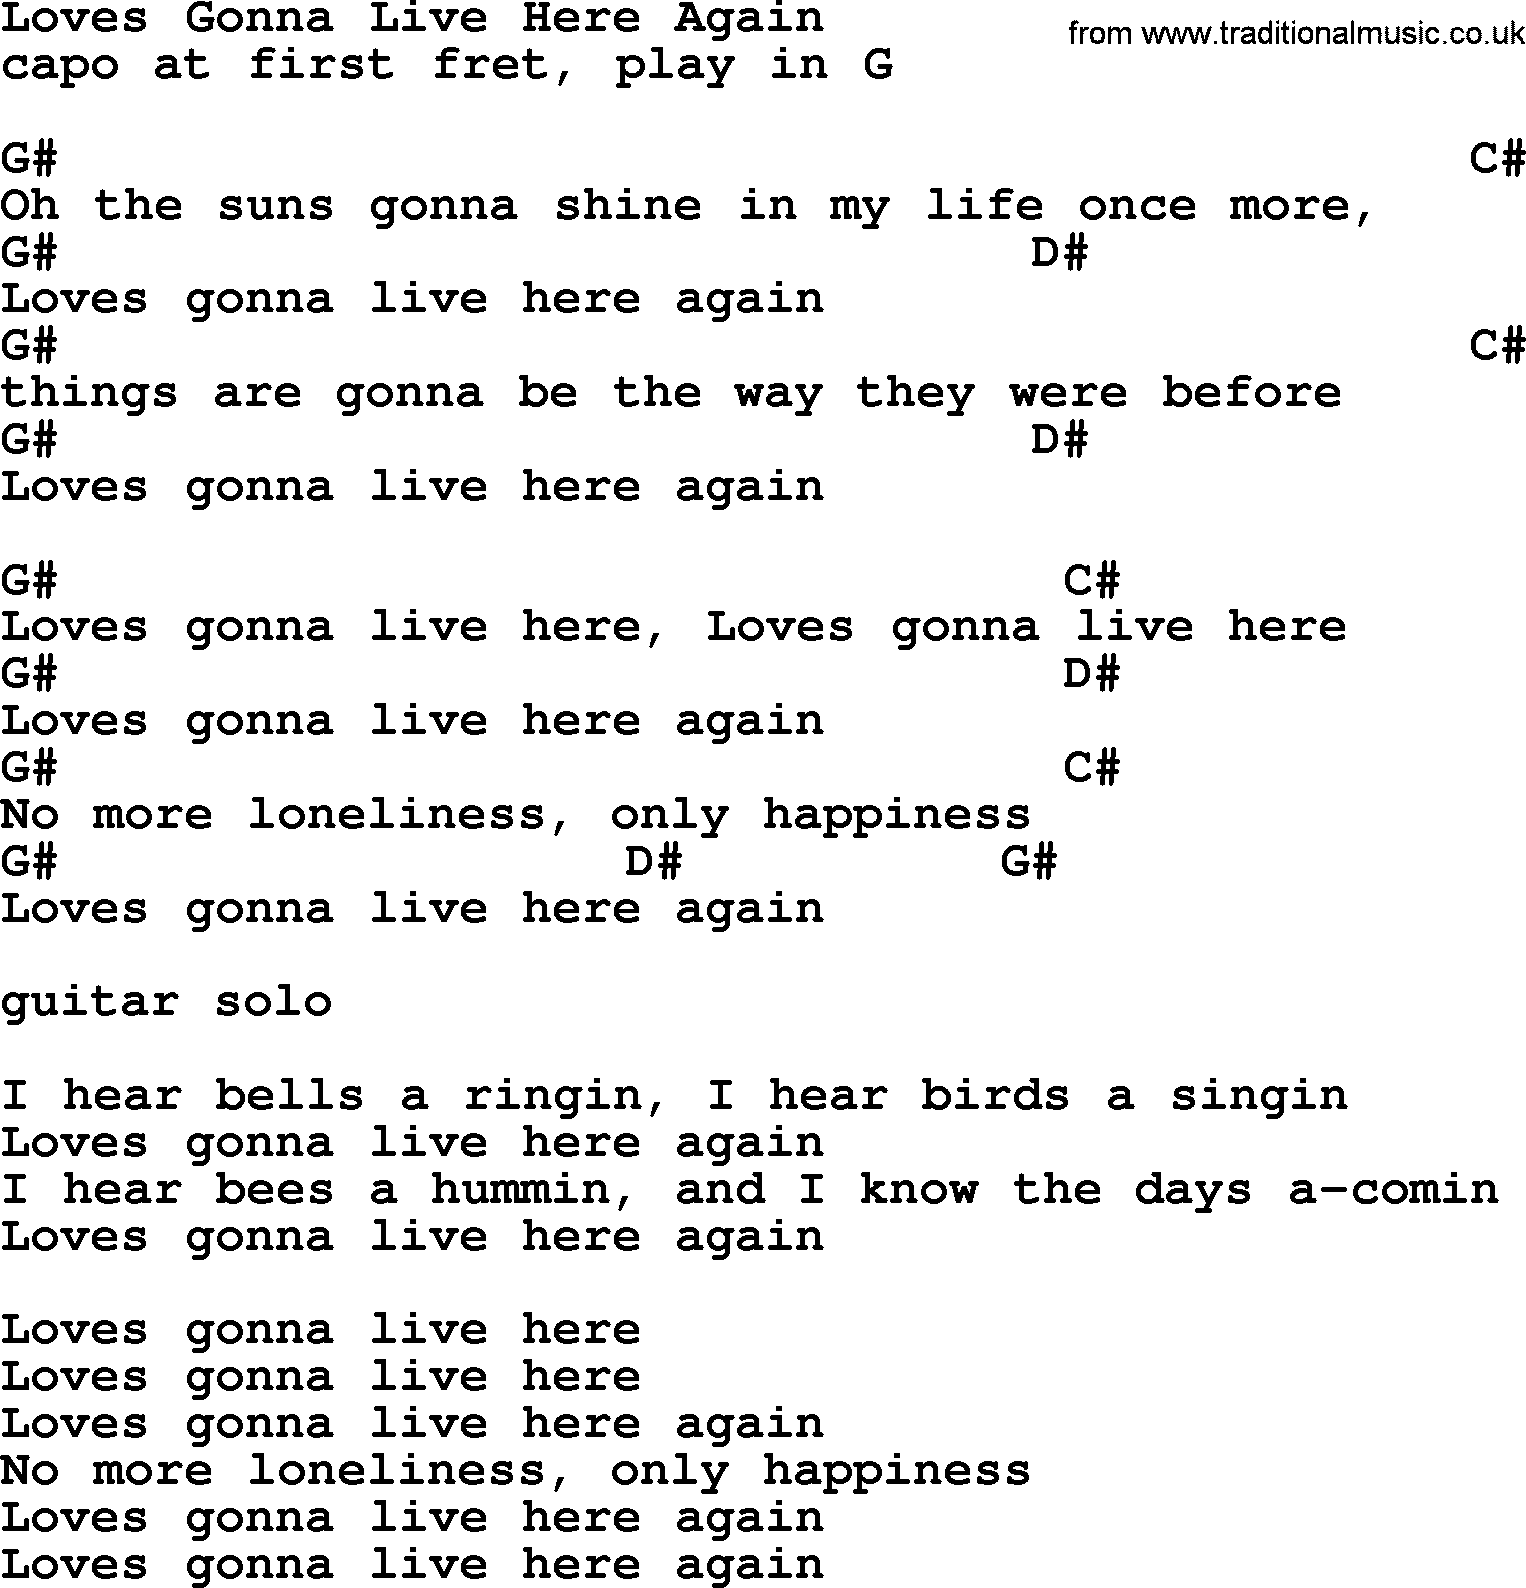 Bluegrass song: Loves Gonna Live Here Again, lyrics and chords